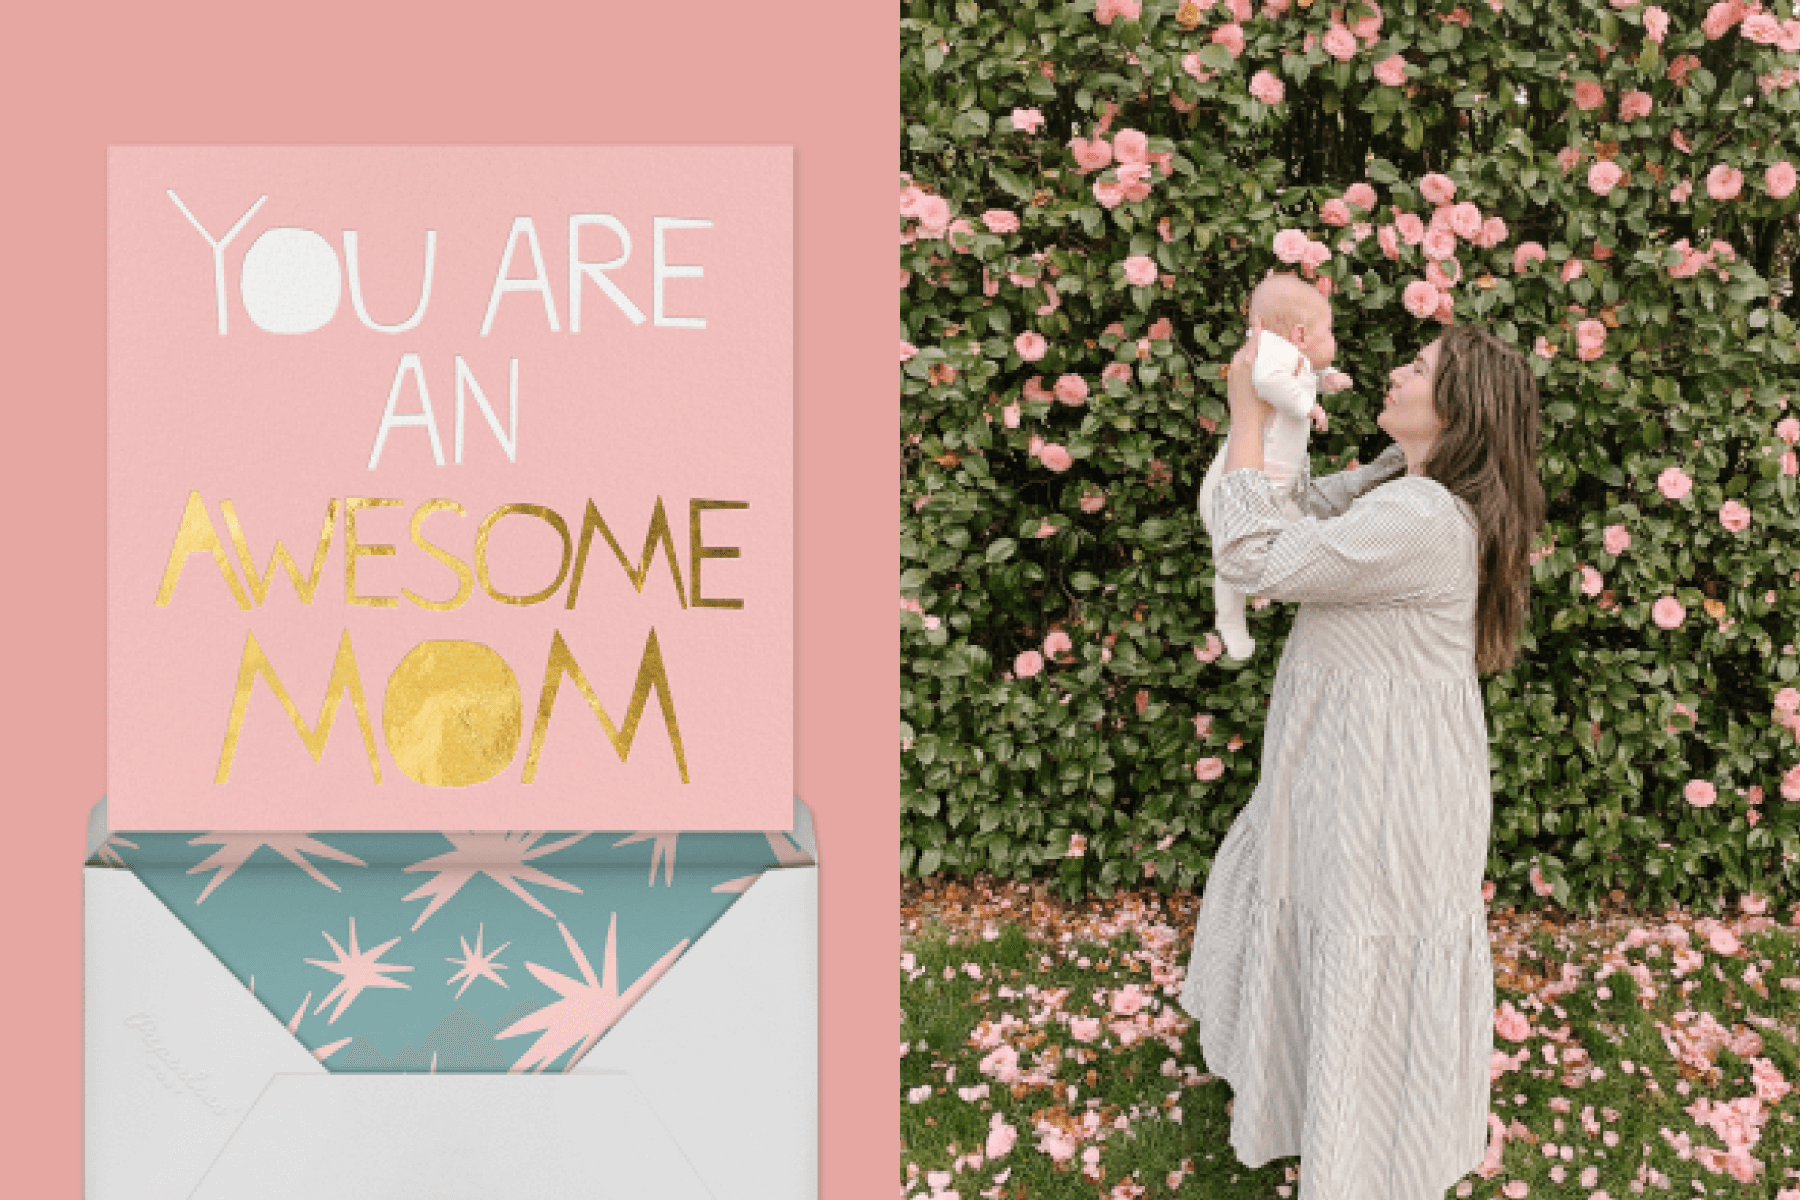 Left: A mother’s day card that says “You are an awesome mom.” Right: Ashley G Founder Ashley Poirier holding her baby in front of a bush of roses.